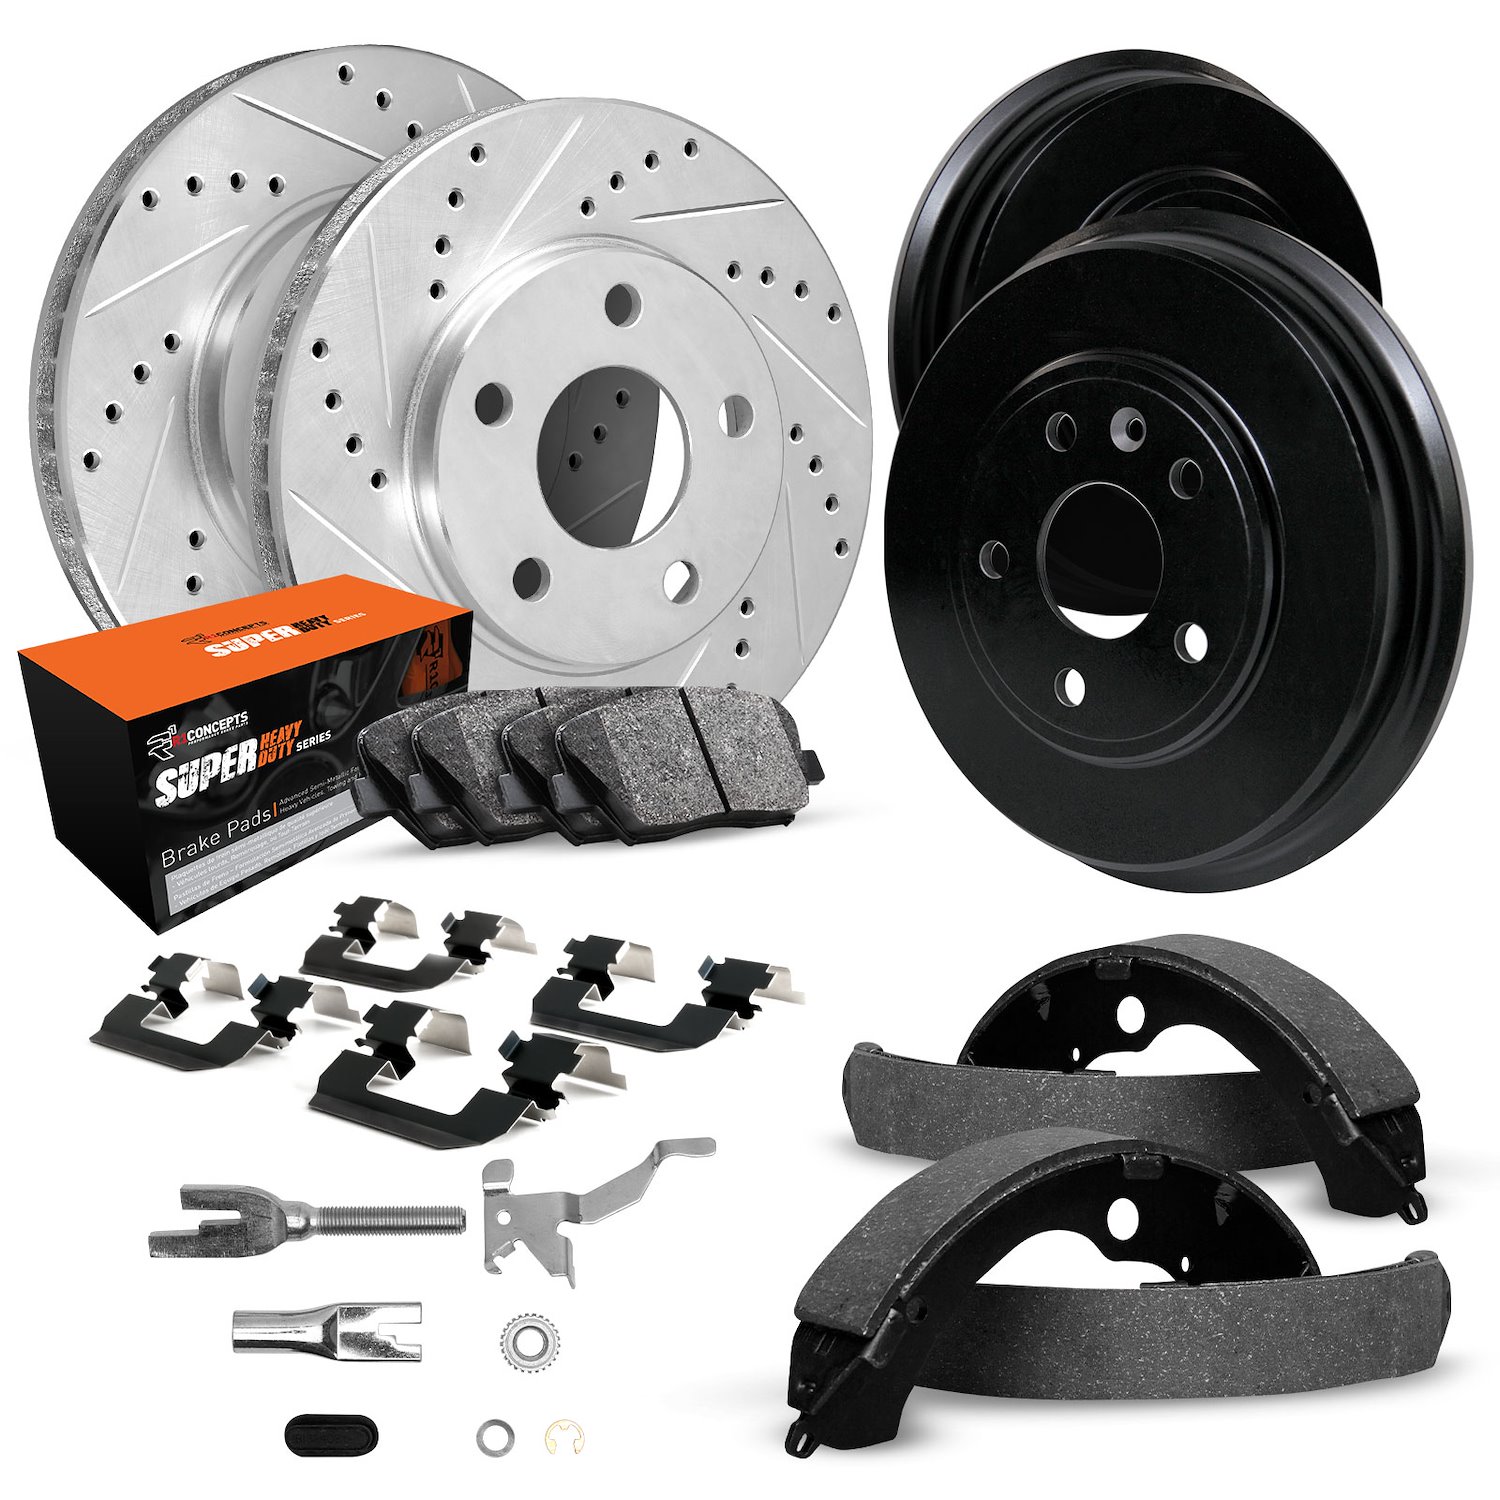 E-Line Drilled/Slotted Silver Rotor & Drum Set w/Super-Duty Pads, Shoes/Hardware/Adjusters, 1972-1972 Ford/Lincoln/Mercury/Mazda